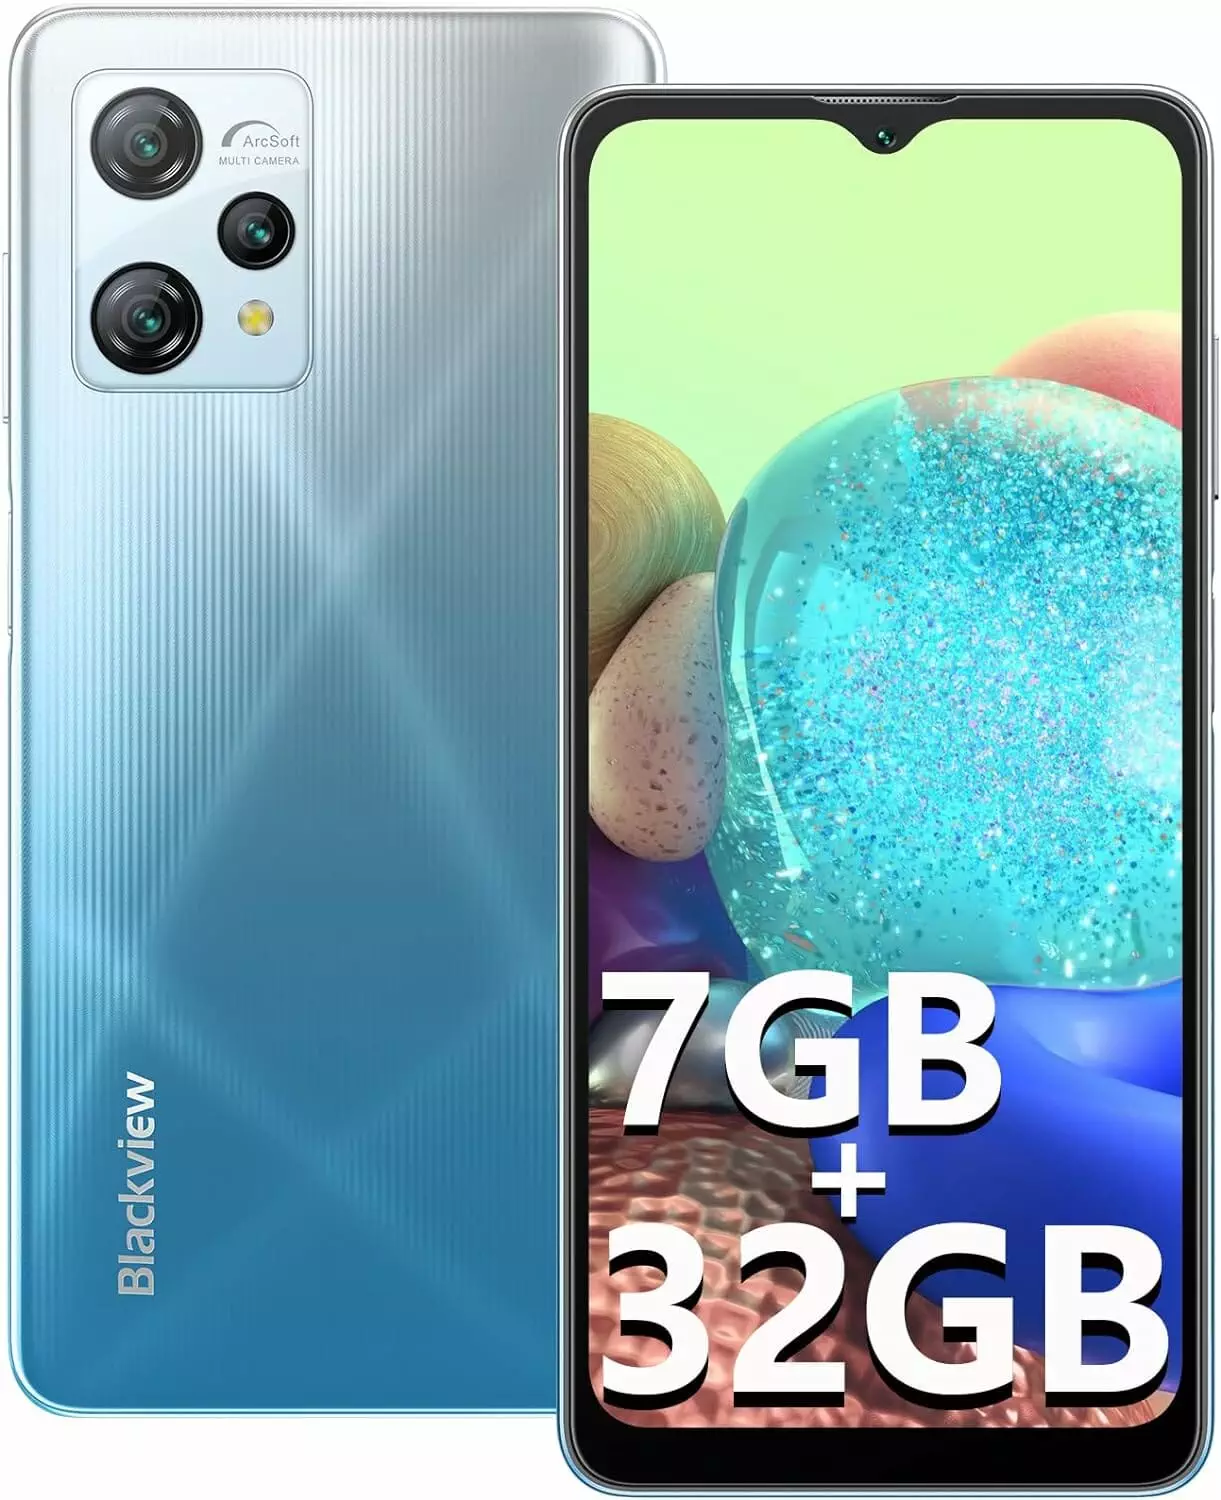 Blackview A53 (2023) Mobile Phone Without Contract, 7GB+ 32GB/256GB Expandable 2.0 GHz Processor, 5080 mAh 6.5 Inch HD+ Display Android 12 Cheap Smartphone 4G, 12MP + 8MP Panorama Camera, Dual SIM 3